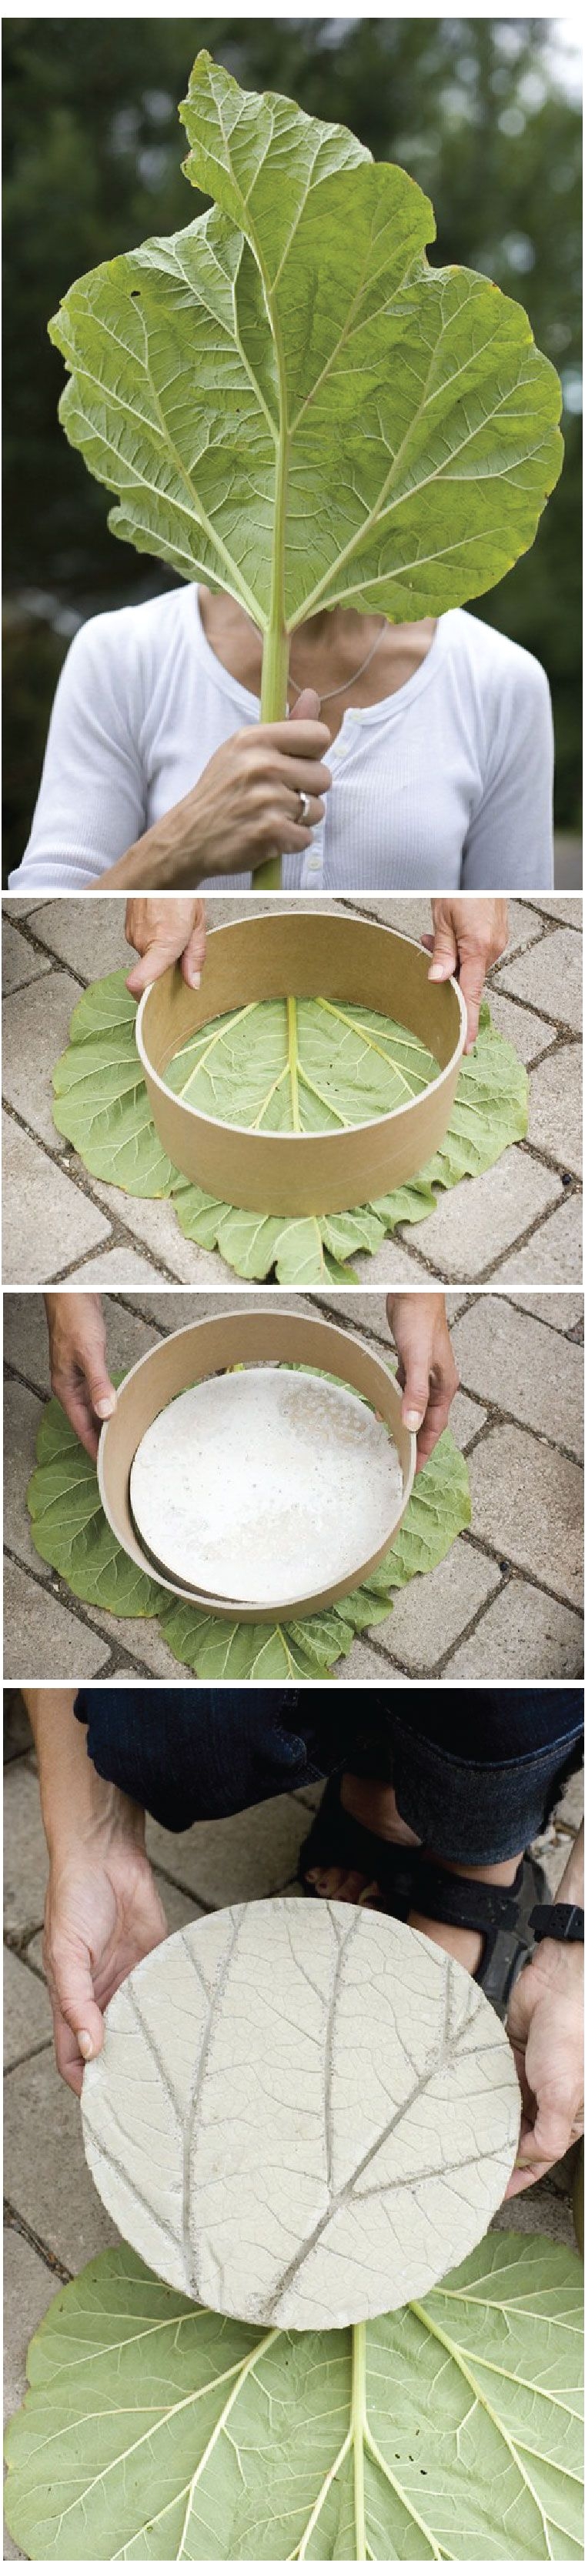 diy garden stone another link here http familycrafts about com od steppingstones ig garden stepping stone photos rhubarb leaf stepping stones htm